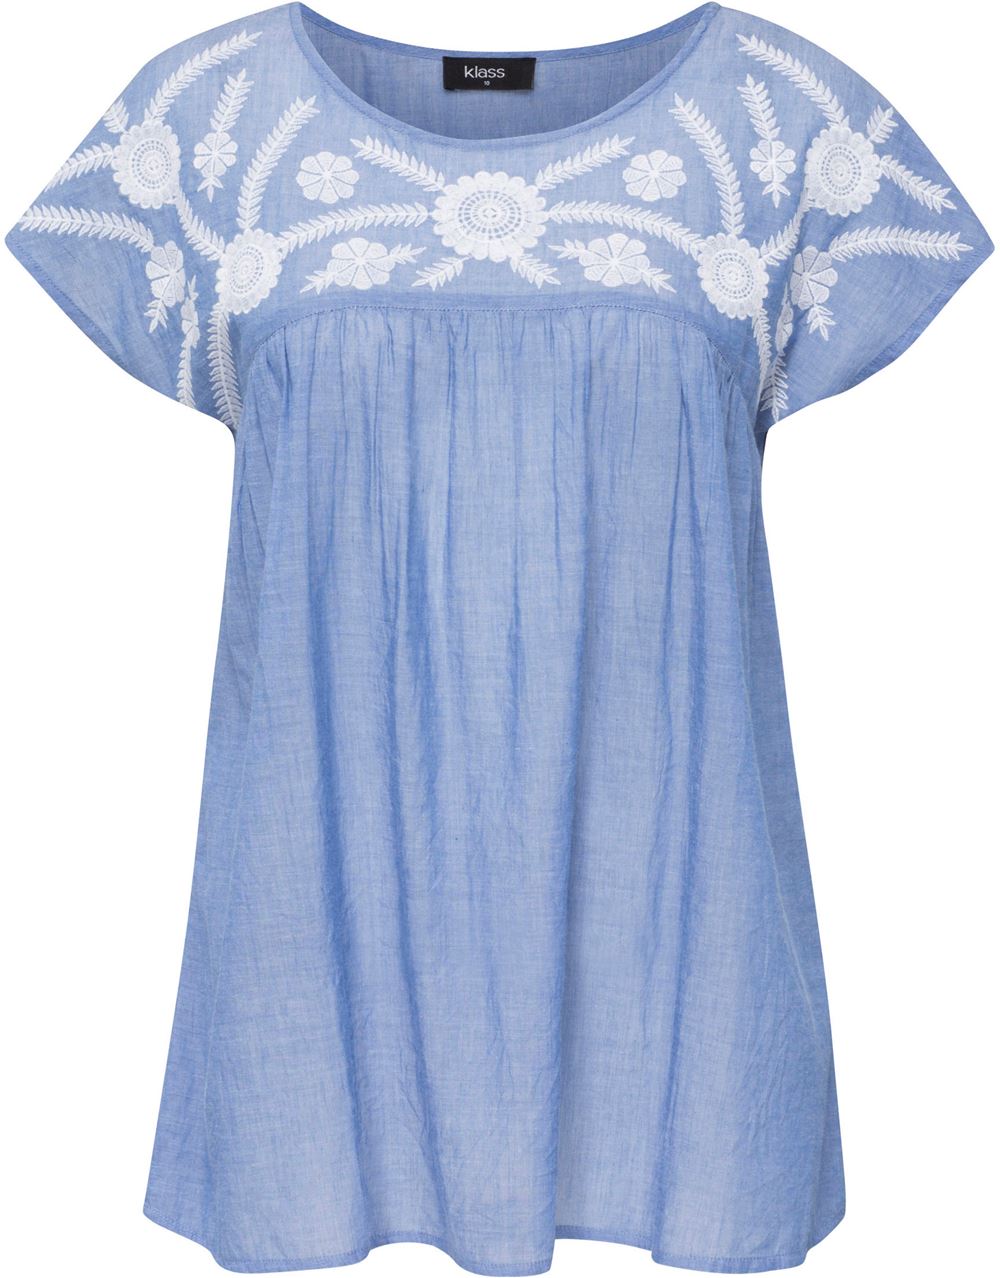 Embroidered Short Sleeve Cotton Top